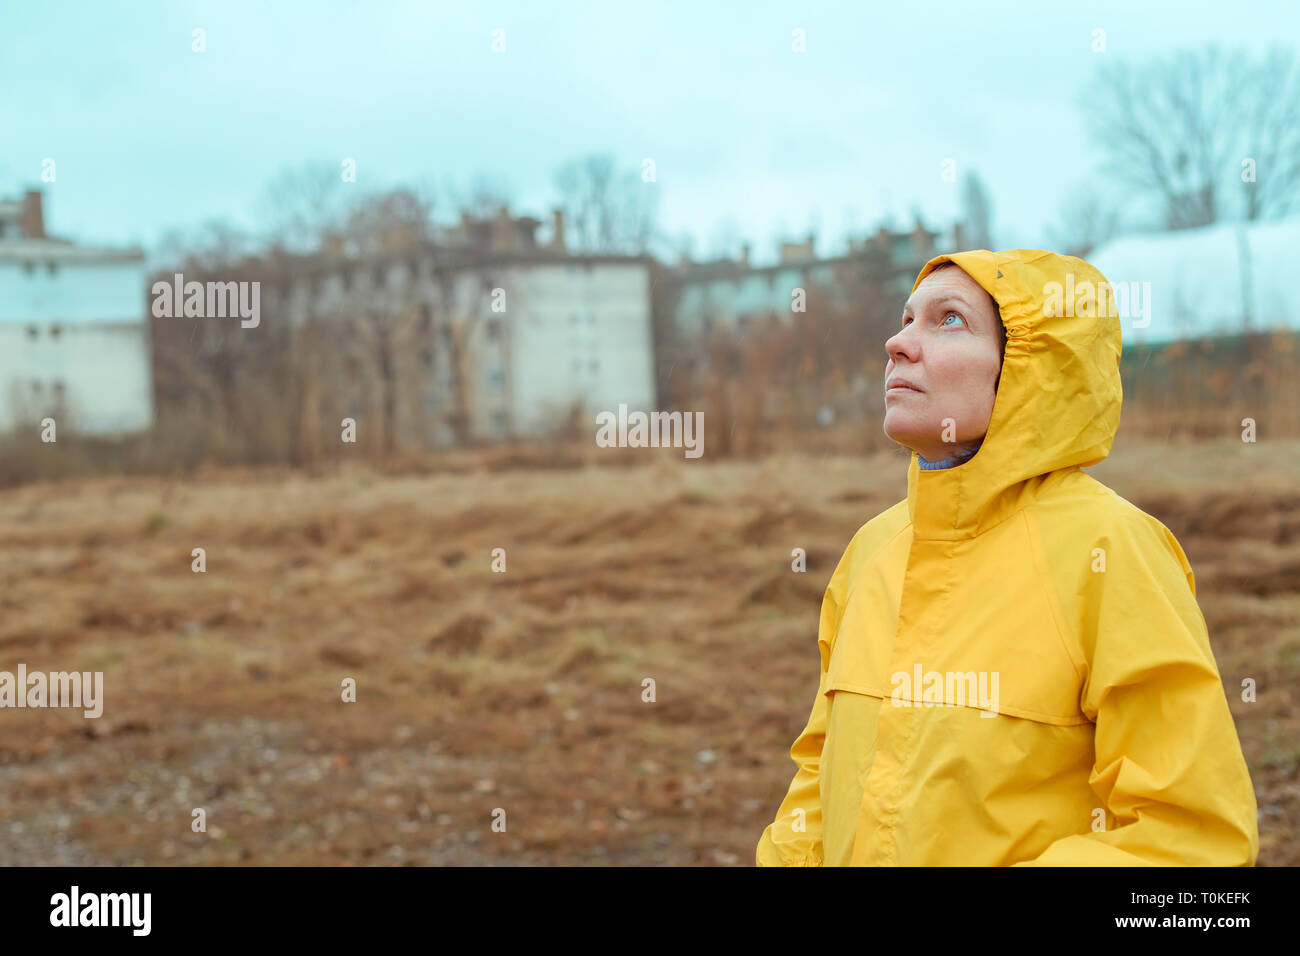 Woman in yellow raincoat looking up at rainy clouds while the raindrops are falling on her face Stock Photo